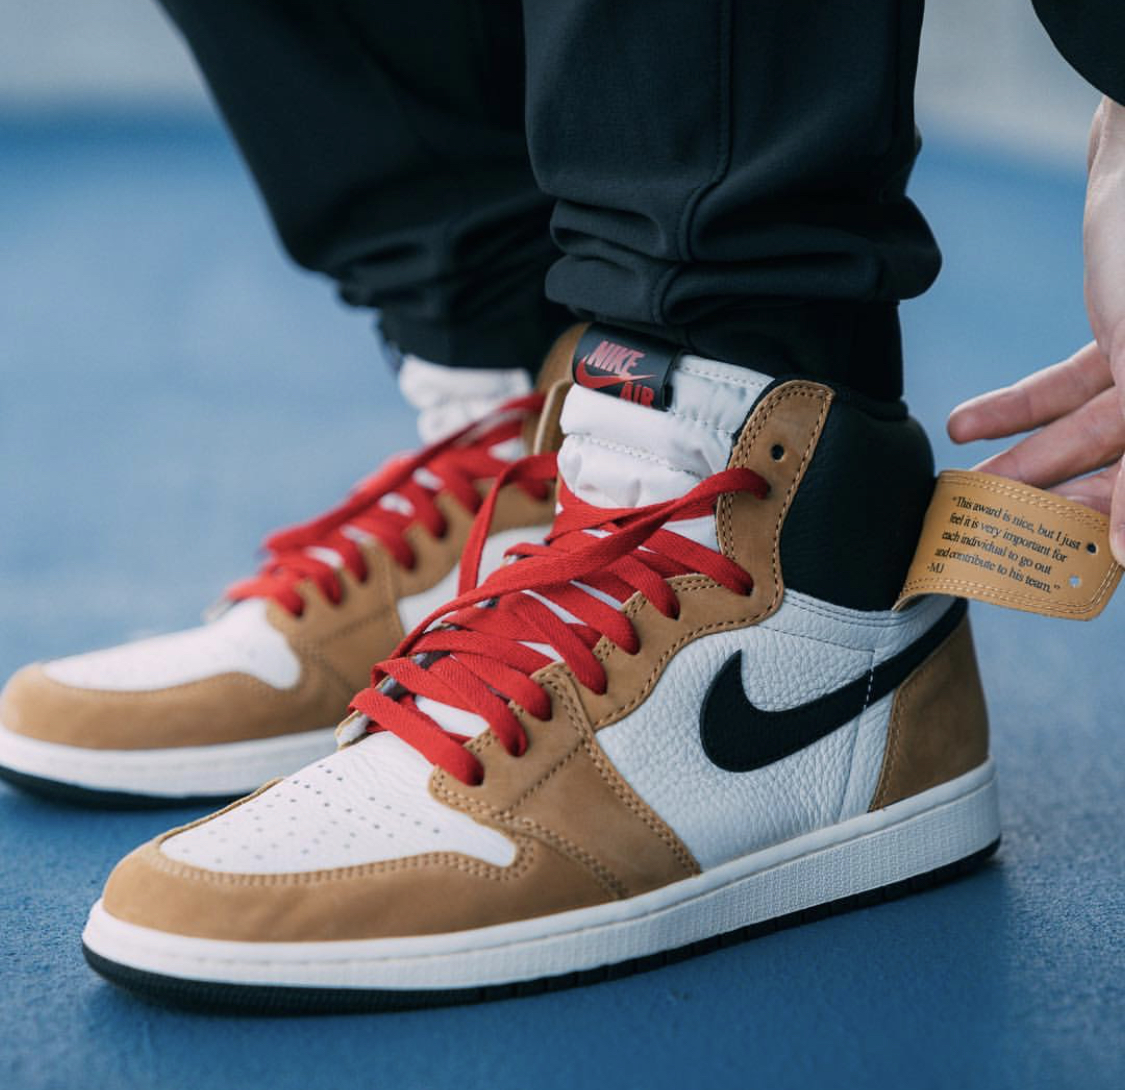 Available: Air Jordan 1 High Retro OG "Rookie of the Year" Sneaker Shouts